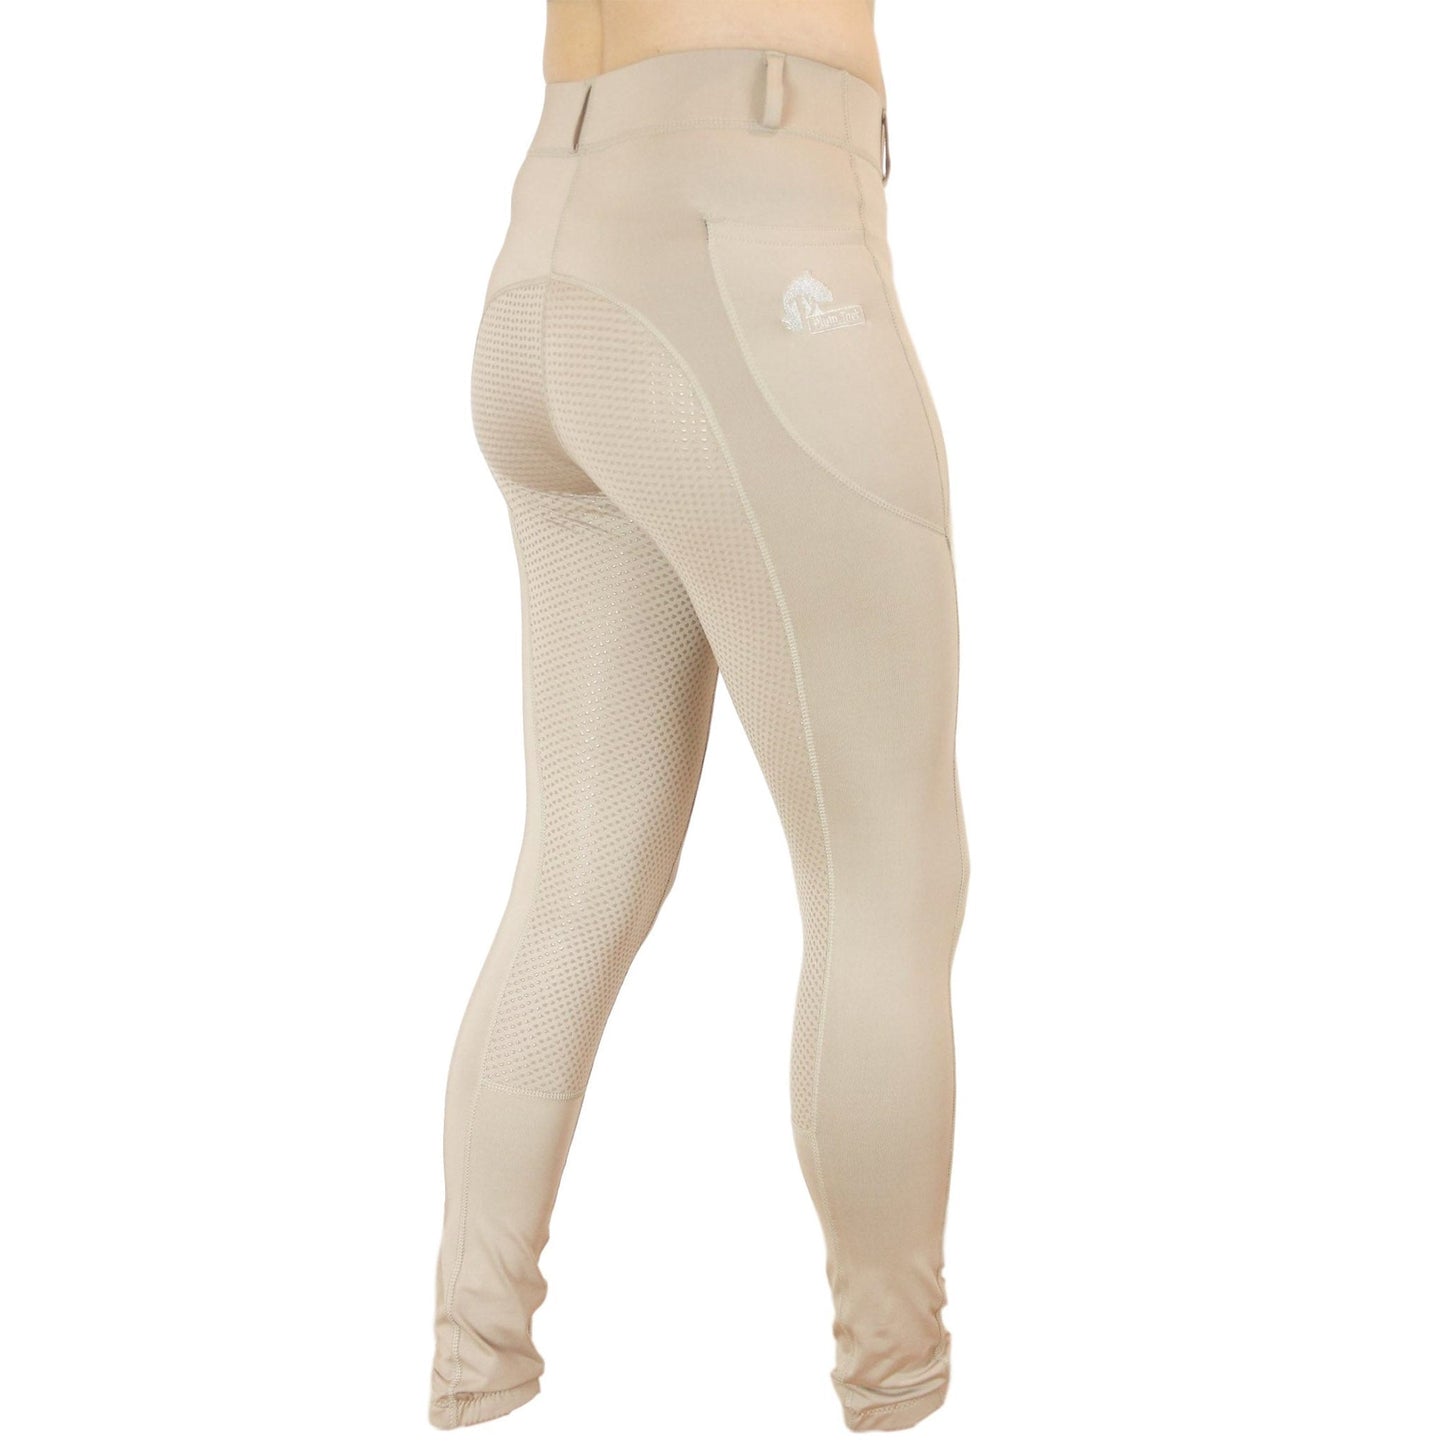 Person wearing beige horse riding tights with mesh panels, no background.